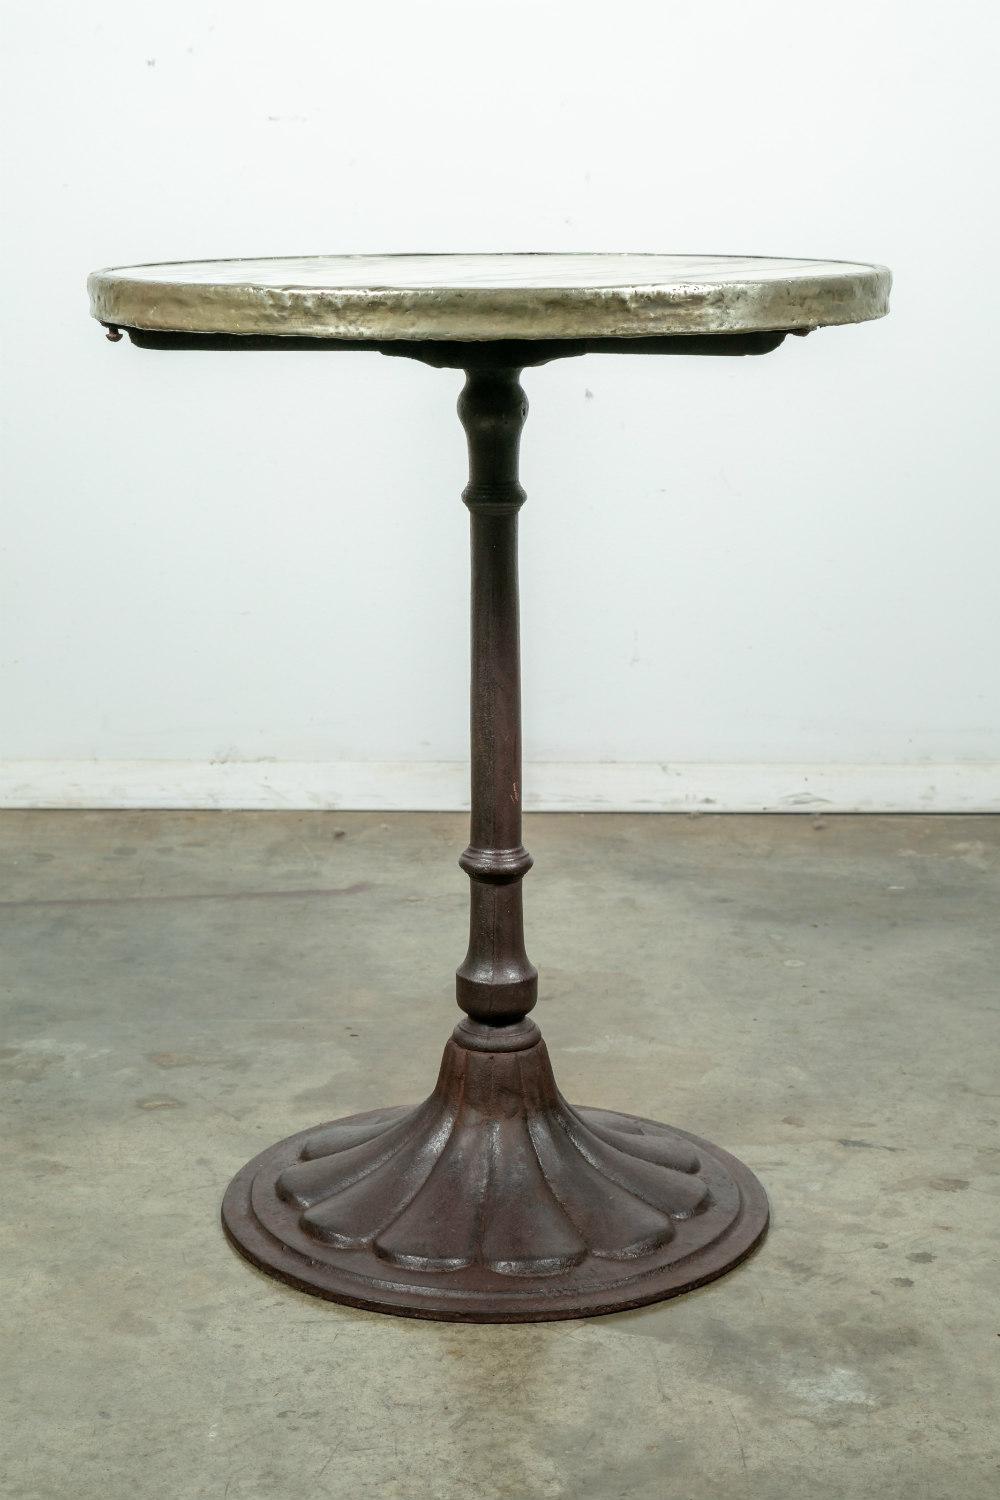 An early 20th century French cast iron Parisian Art Deco bistro table, having the original Carrara marble top with brass surround. Raised on a rare tulip base with a lovely aged patina. This table would be a wonderful garden or patio table, as well